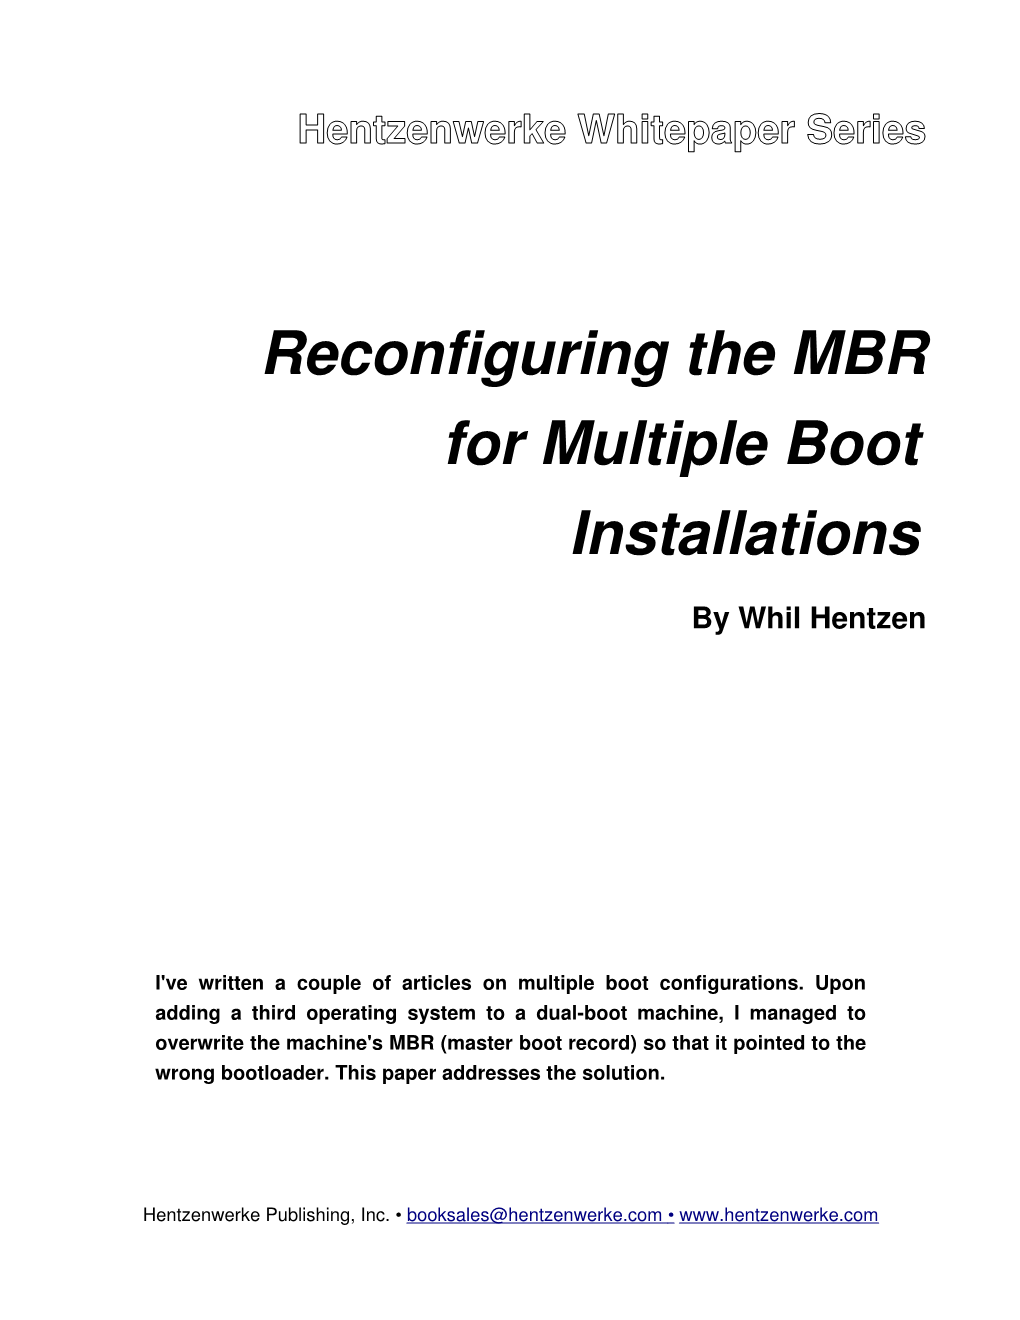 Reconfiguring the MBR for Multiple Boot Installations